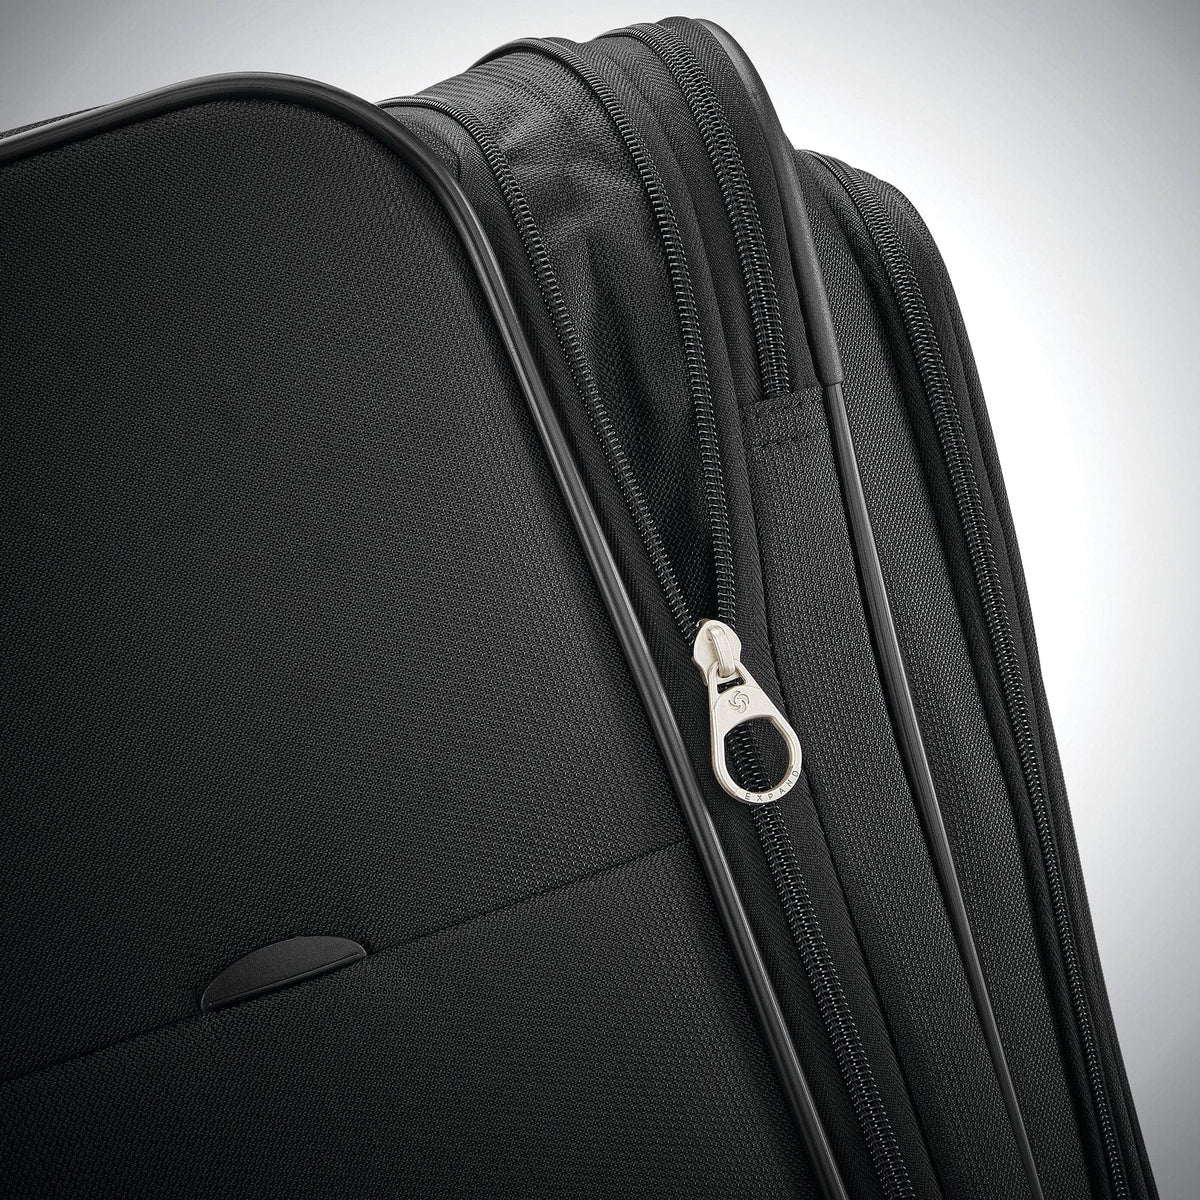 Samsonite Ascella X Carry-On Spinner Luggage